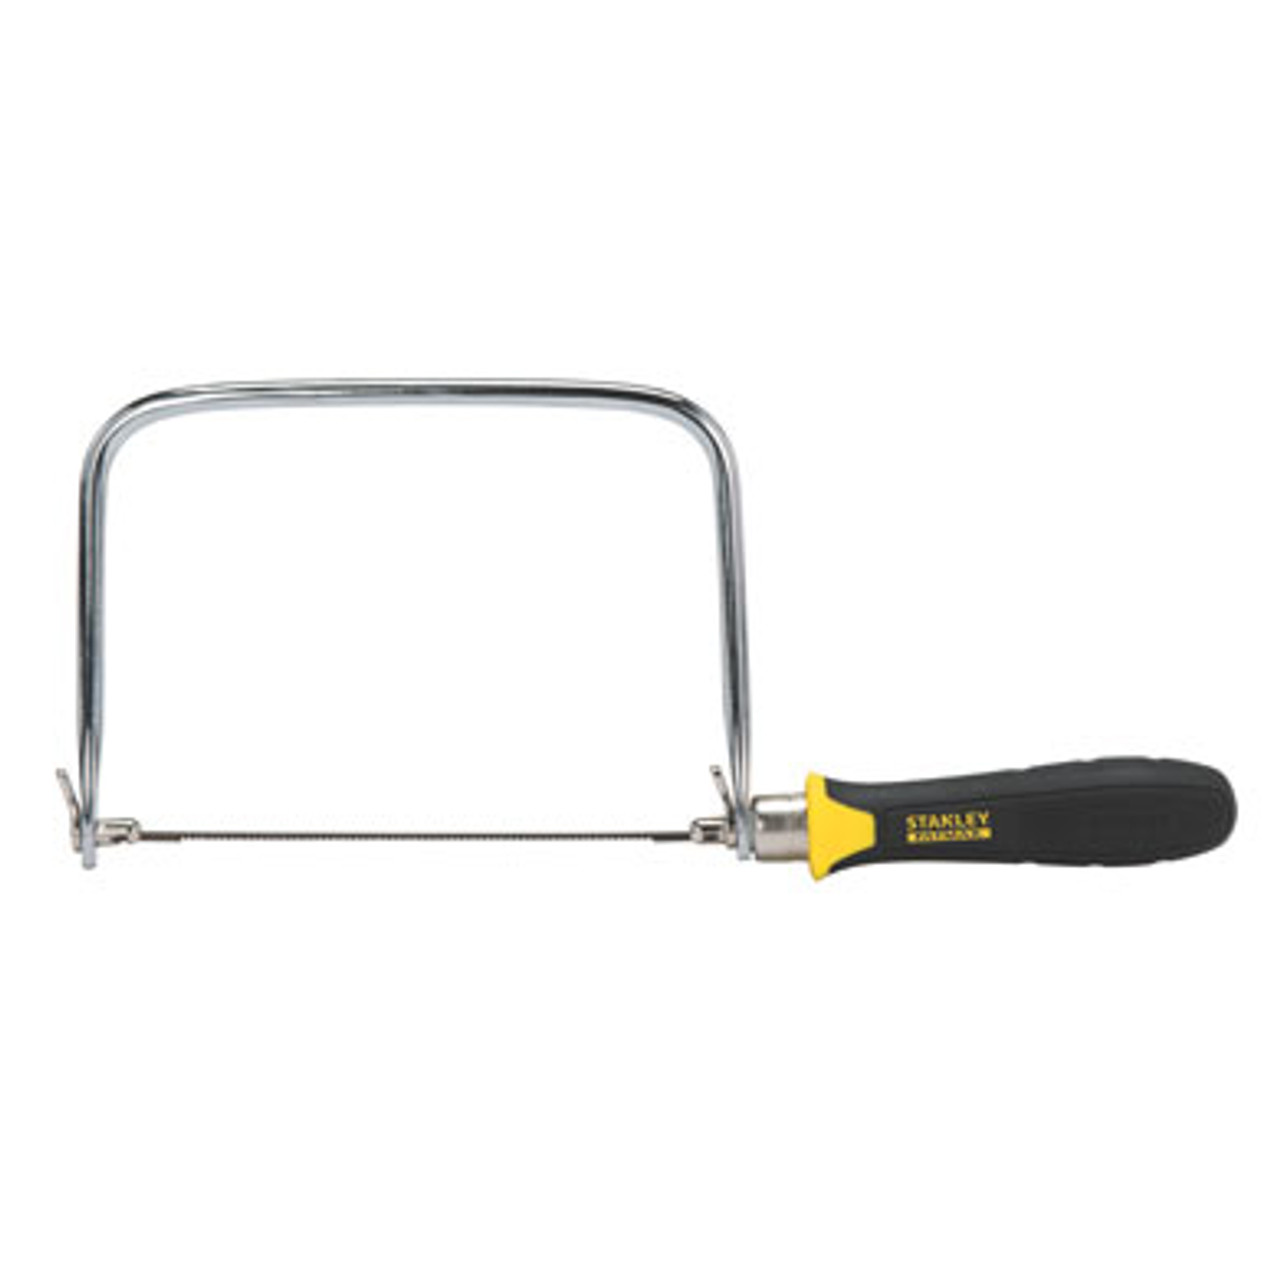 Stanley Tools 4-3/4 in FATMAX Coping Saw 15-104